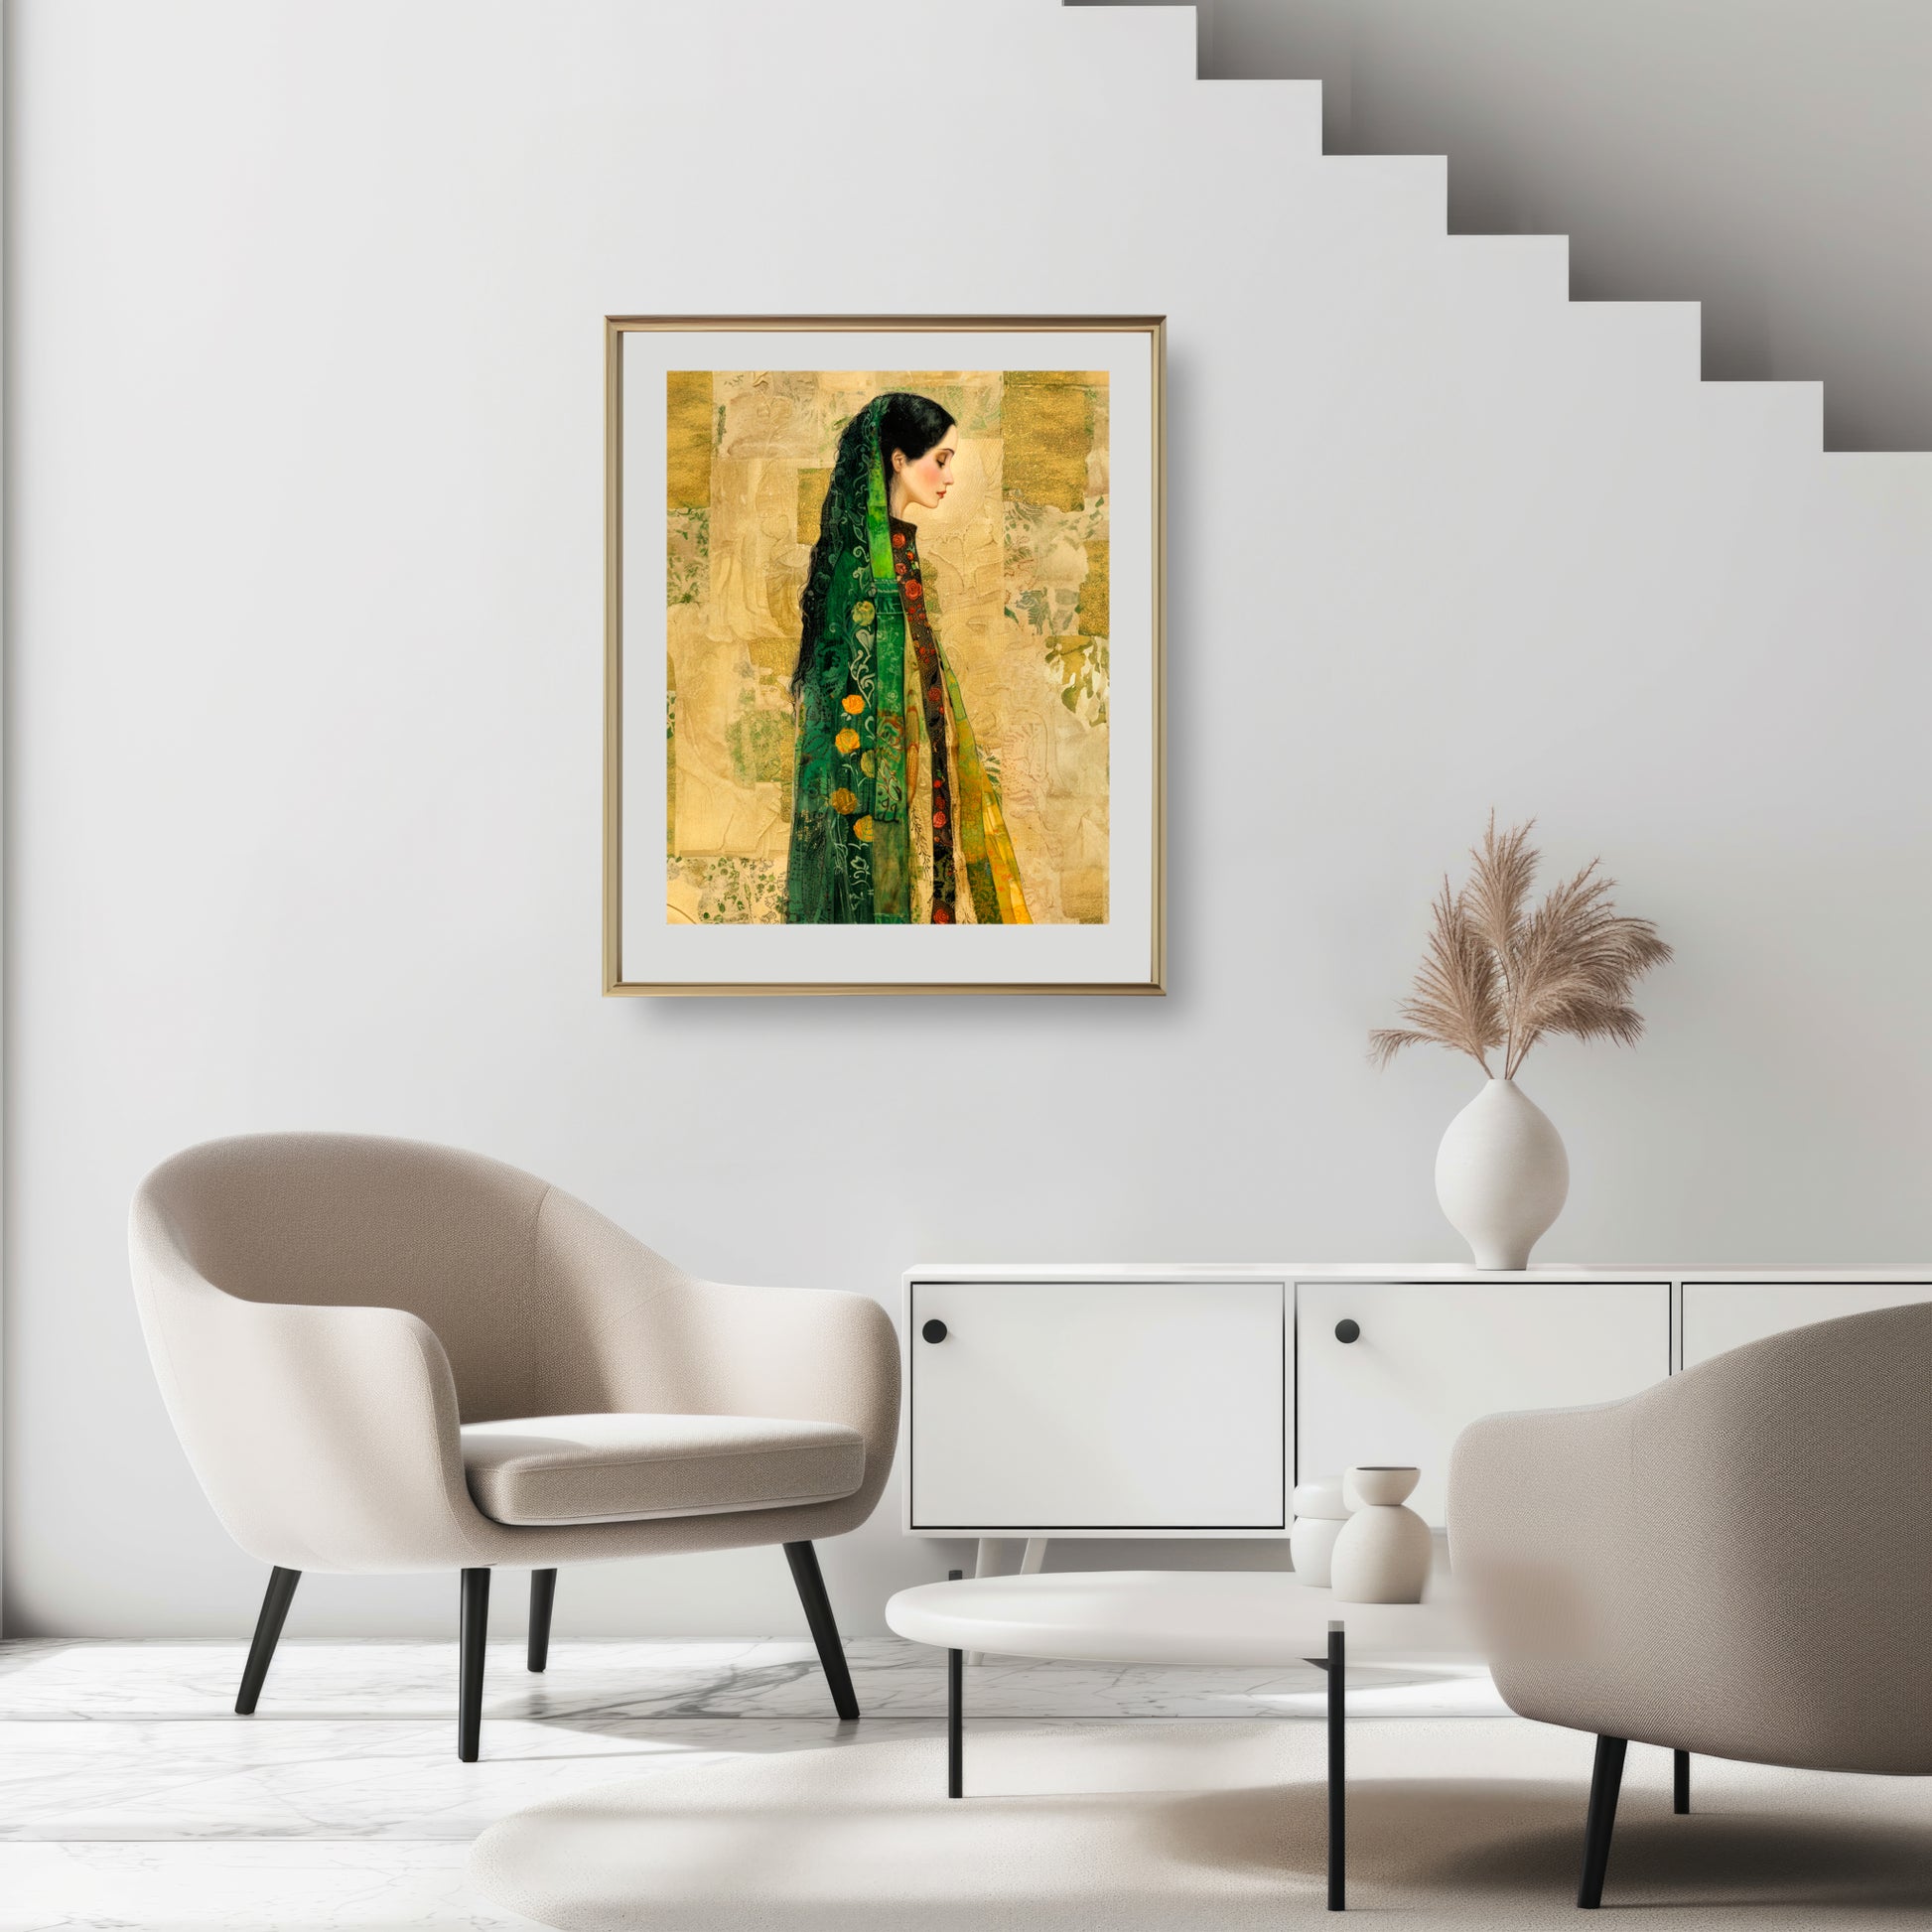 Art print of a woman with dark hair in a green and gold veil from the Heart Of Gold collection.